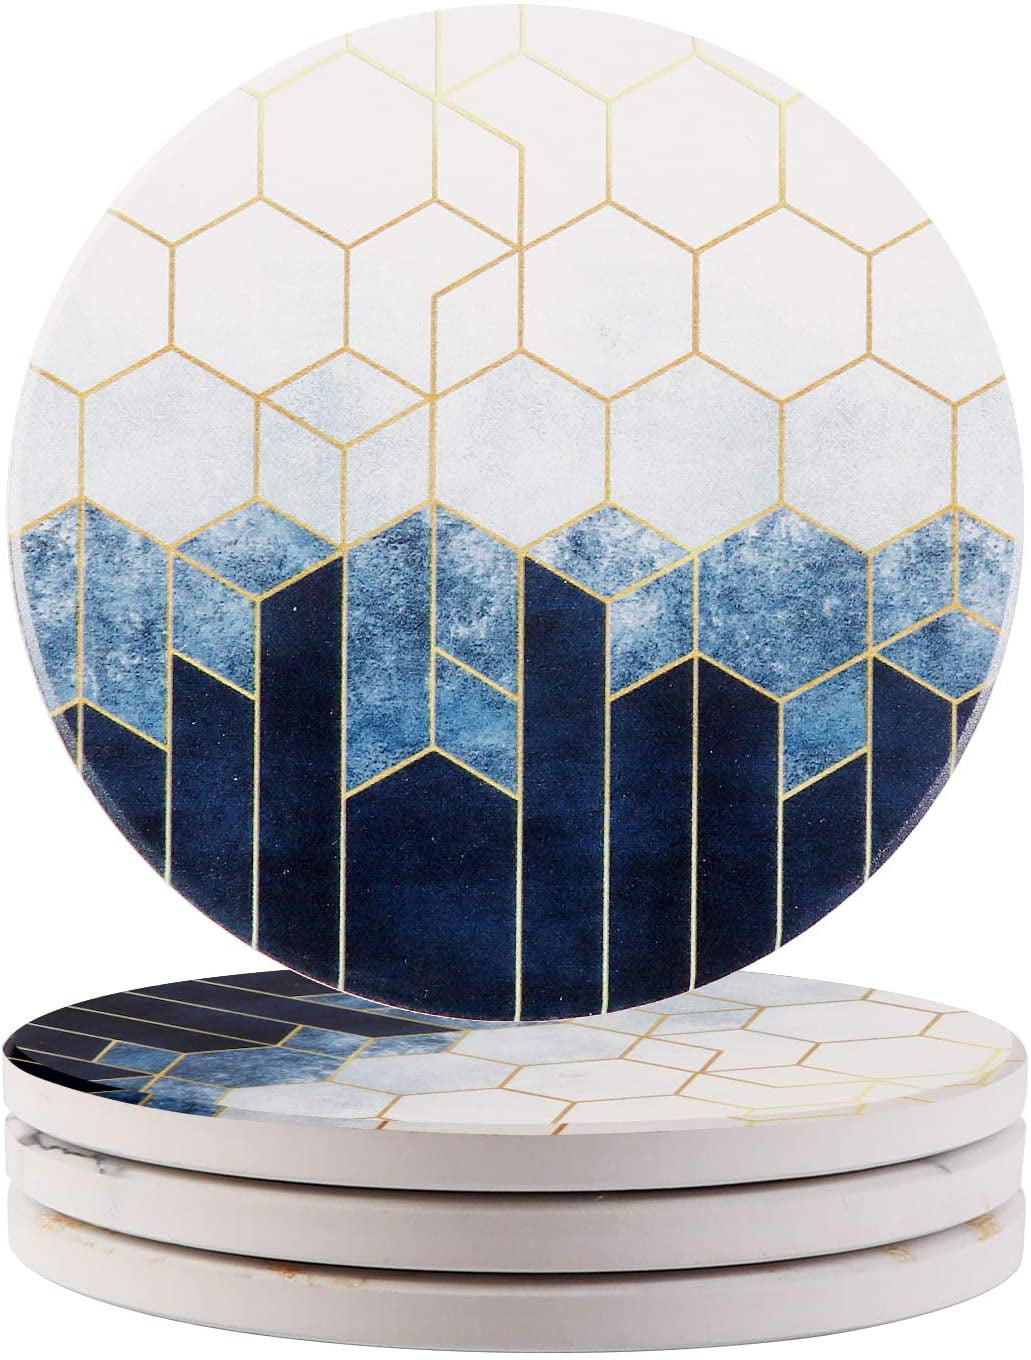 Round Absorbent Coasters Set of 4 Ailsan Coasters for Drinks Navy Blue Diamond Geometry Marble Style Ceramic Stone Coasters with Cork Base 4 inches Housewarming Gift for Home and Kitchen